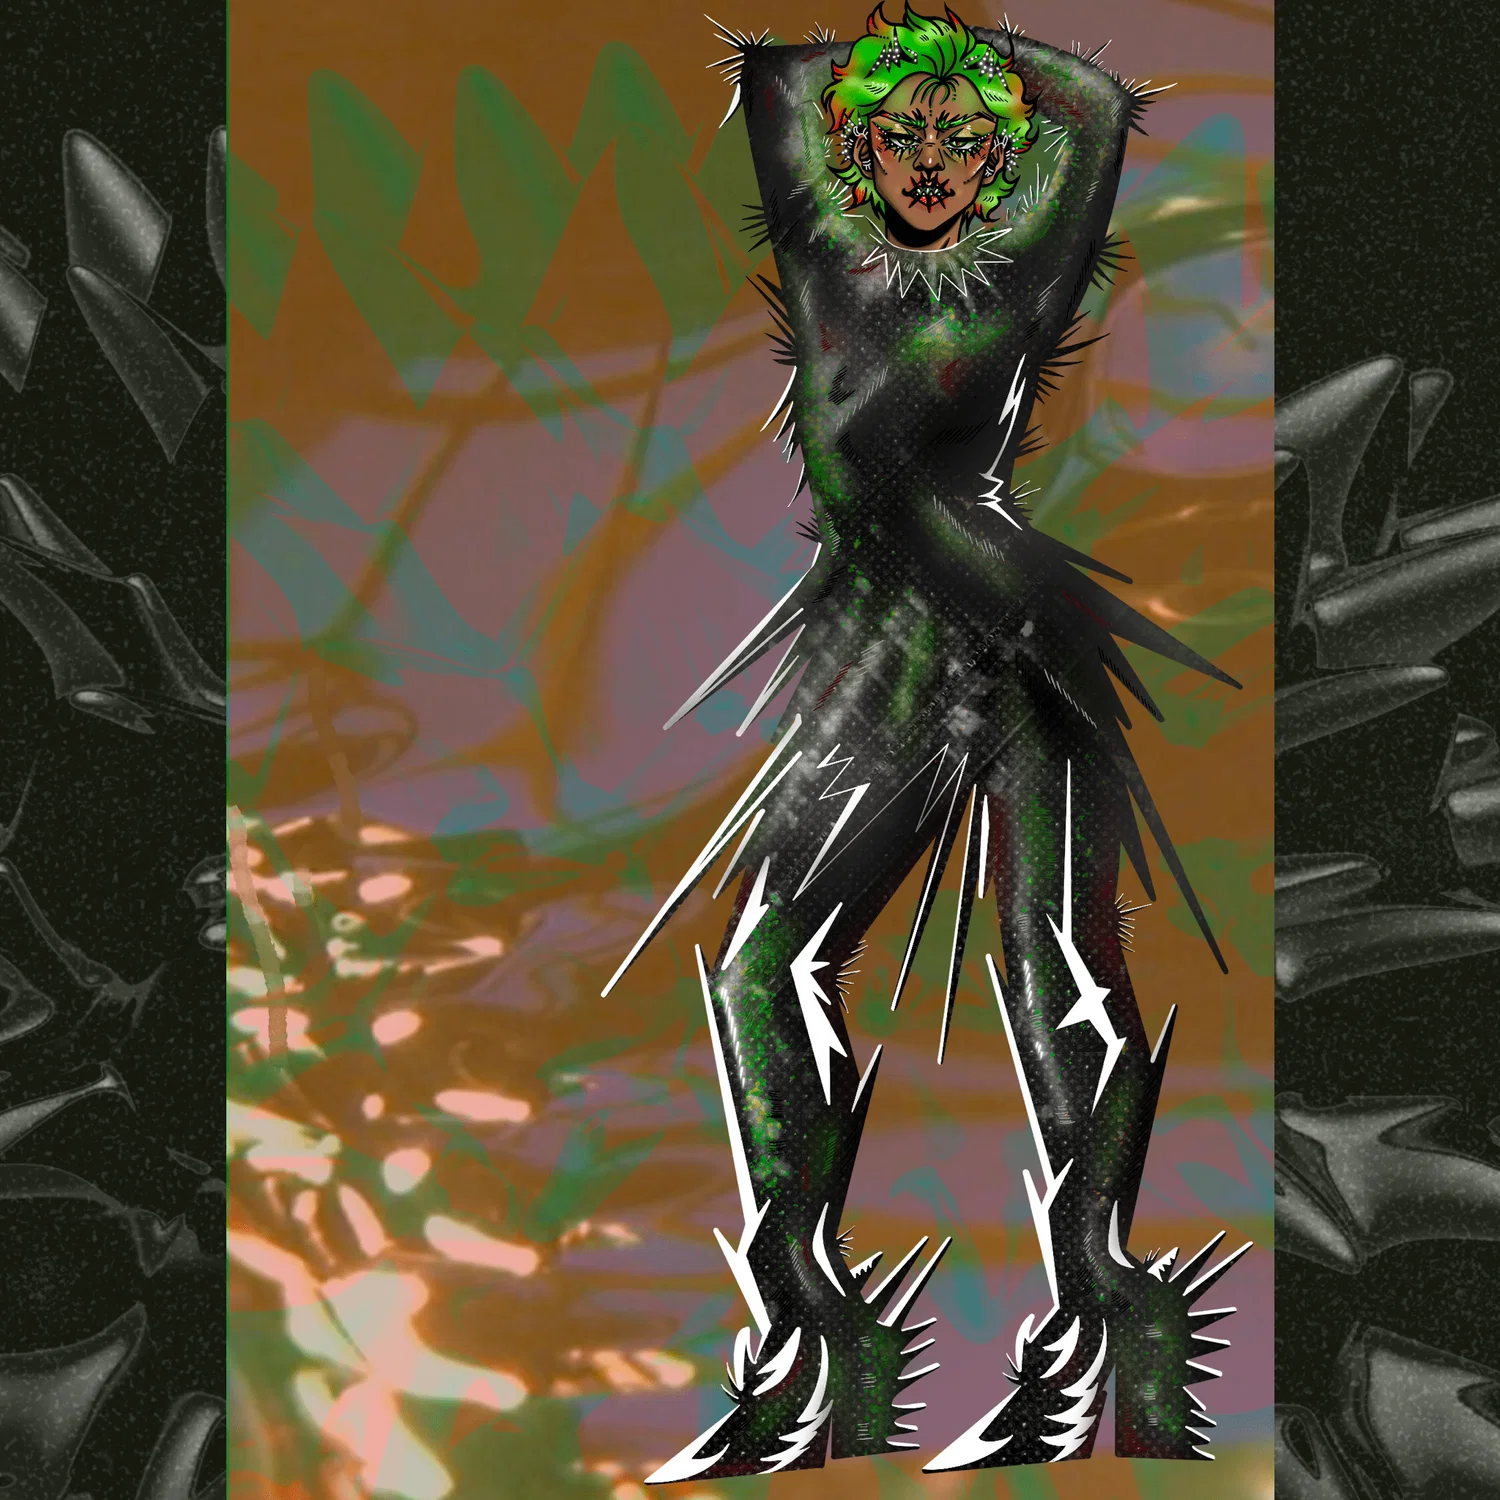 Tall character covered in black spikes with bright green hair with red tips and brown skin. The character is posed with their arms above their head. They have Spikey hearing aids and just very spiky